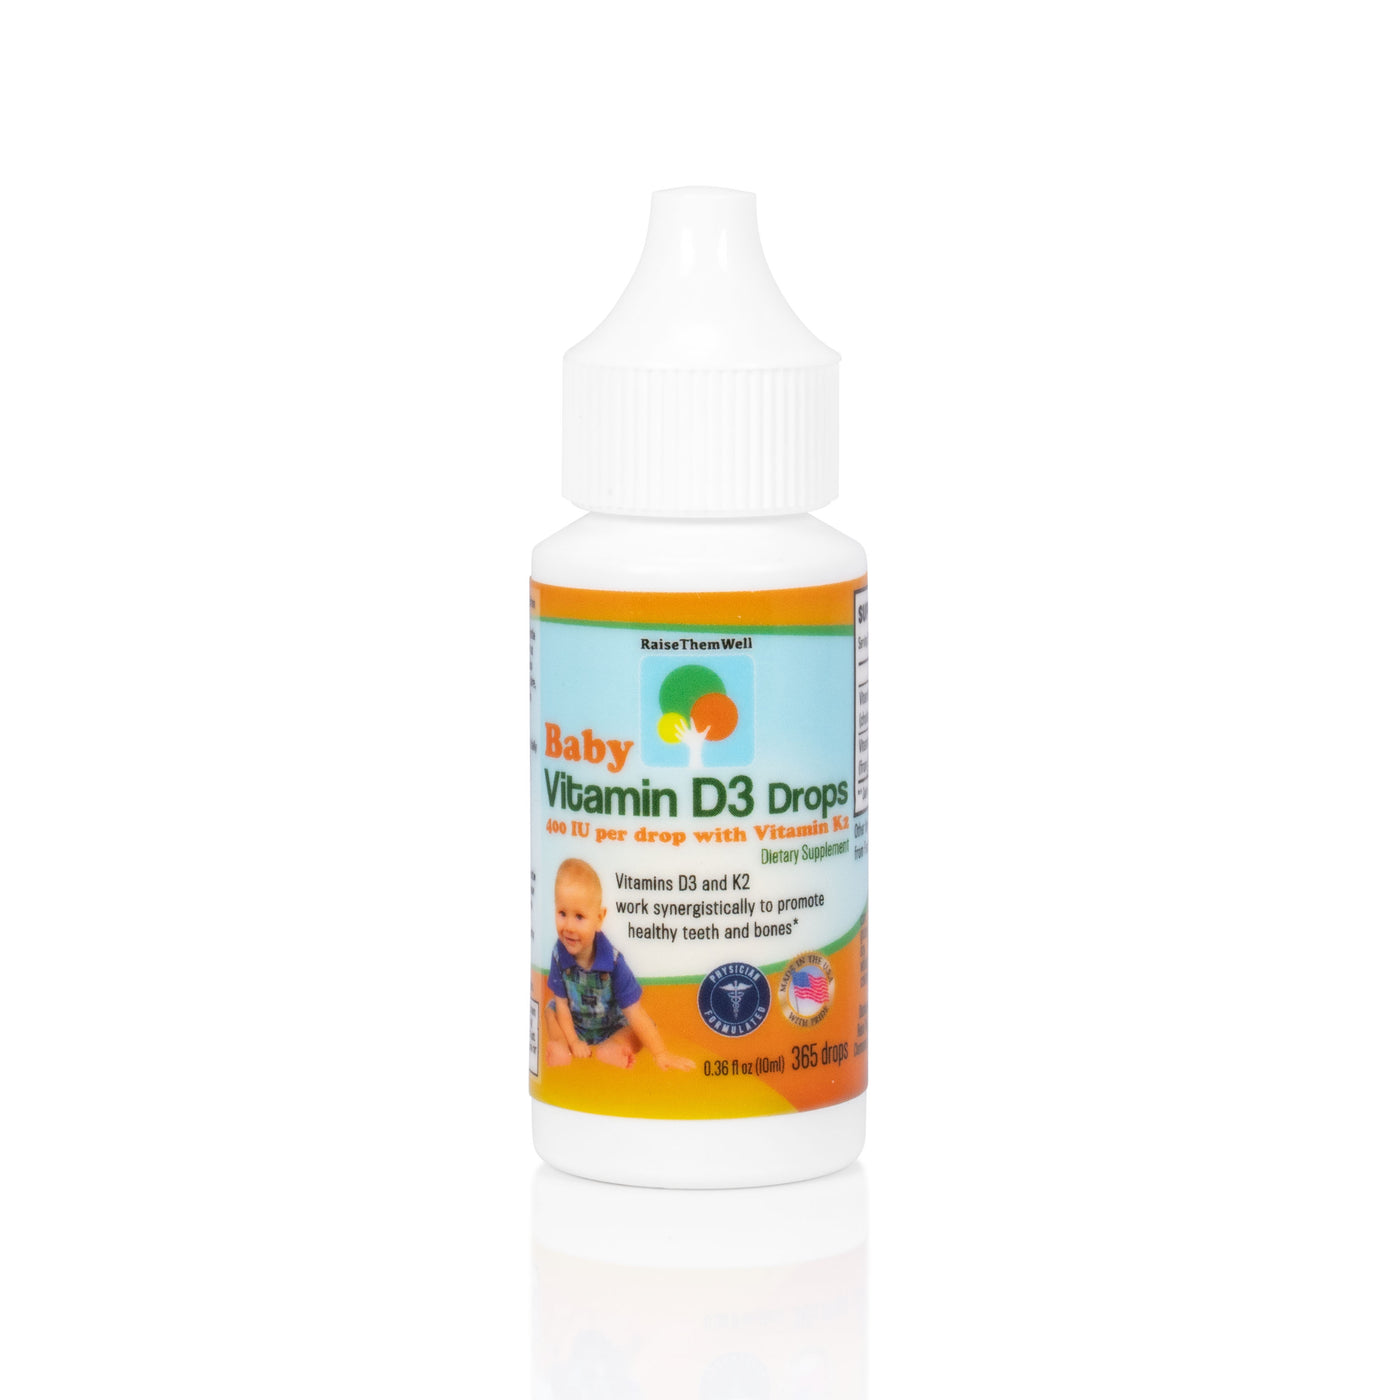 Baby Vitamin D3 And K2 Drops For Ultimate Bone And Teeth Health Raise Them Well